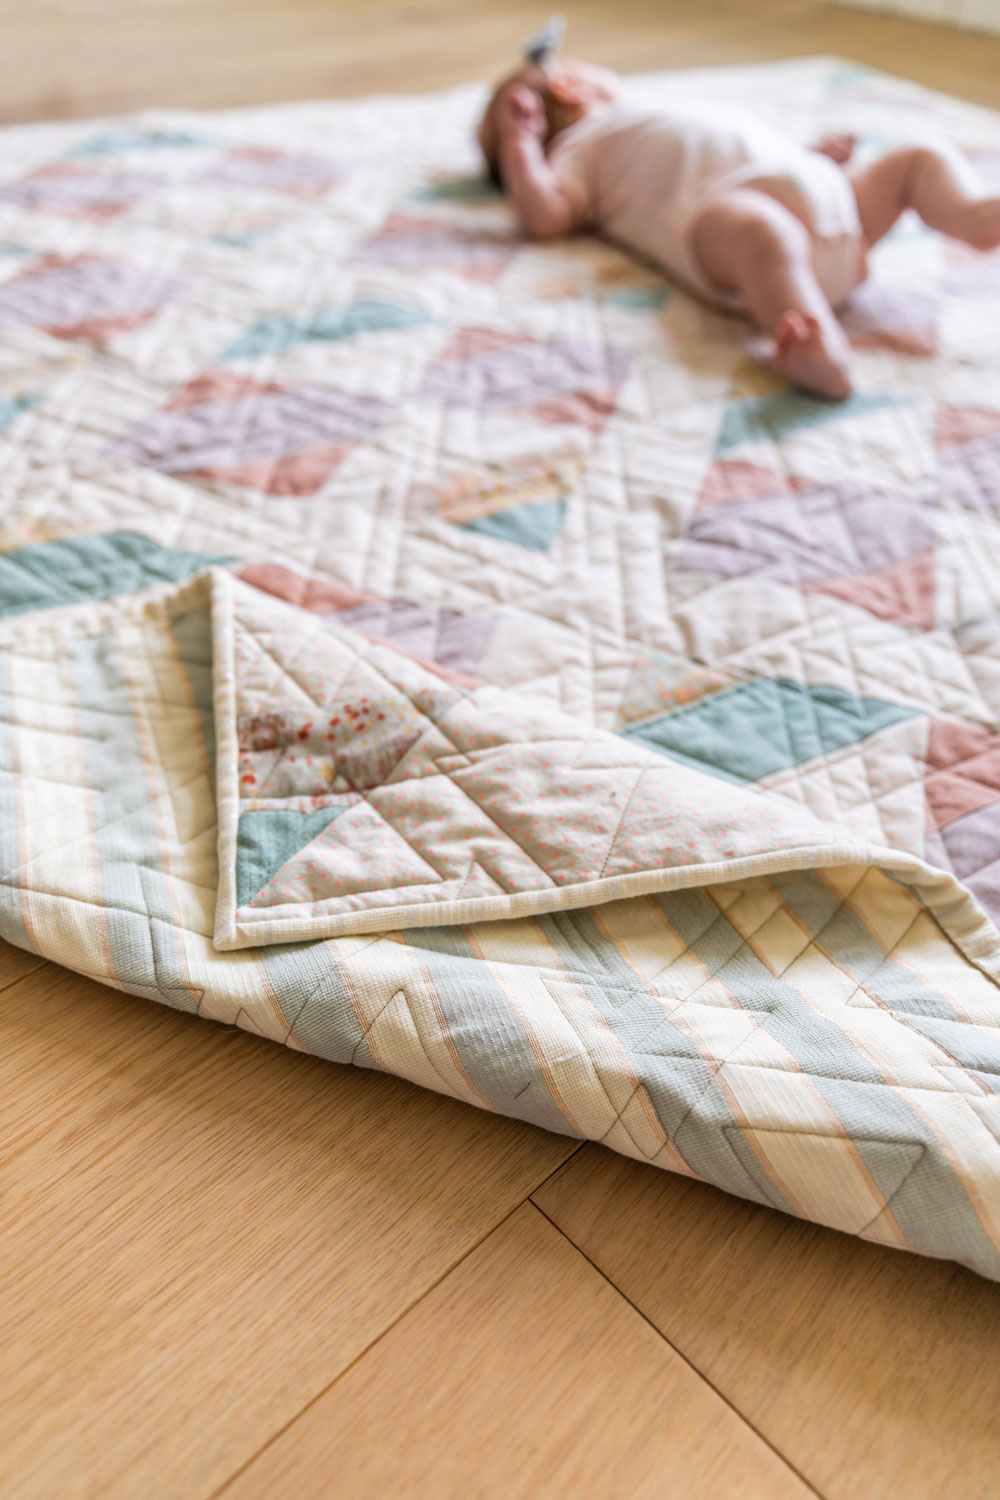 The New Horizons quilt pattern uses large quilt blocks, making it the perfect quilt pattern for double gauze! suzyquilts.com #babyquilt #doublegauze